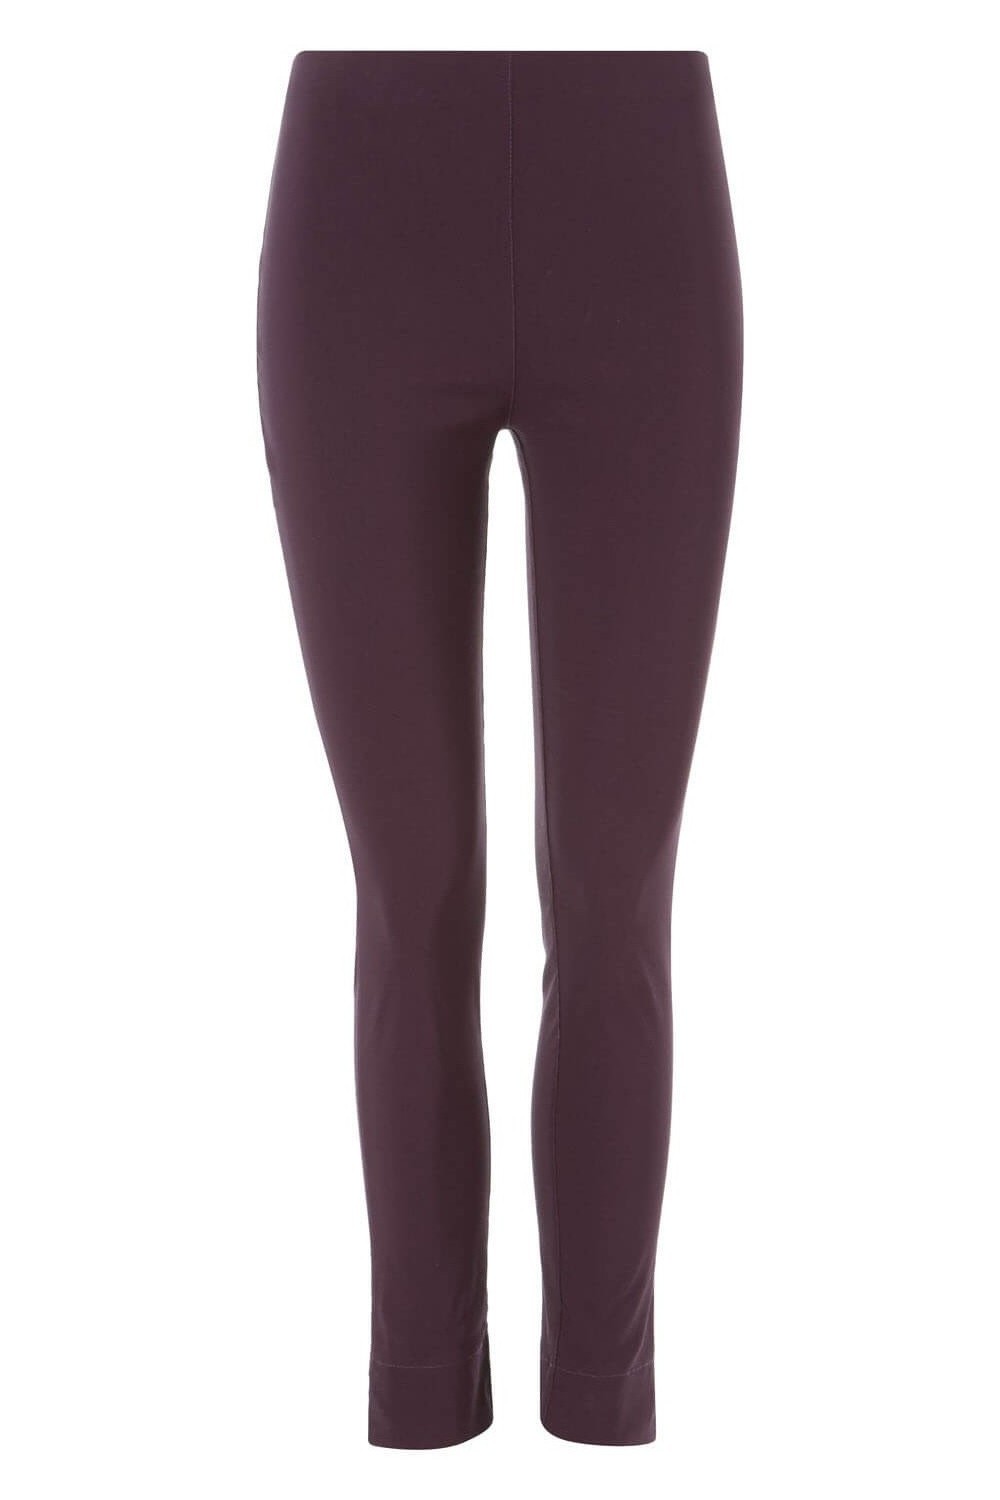 Aubergine Full Length Stretch Trousers, Image 6 of 6